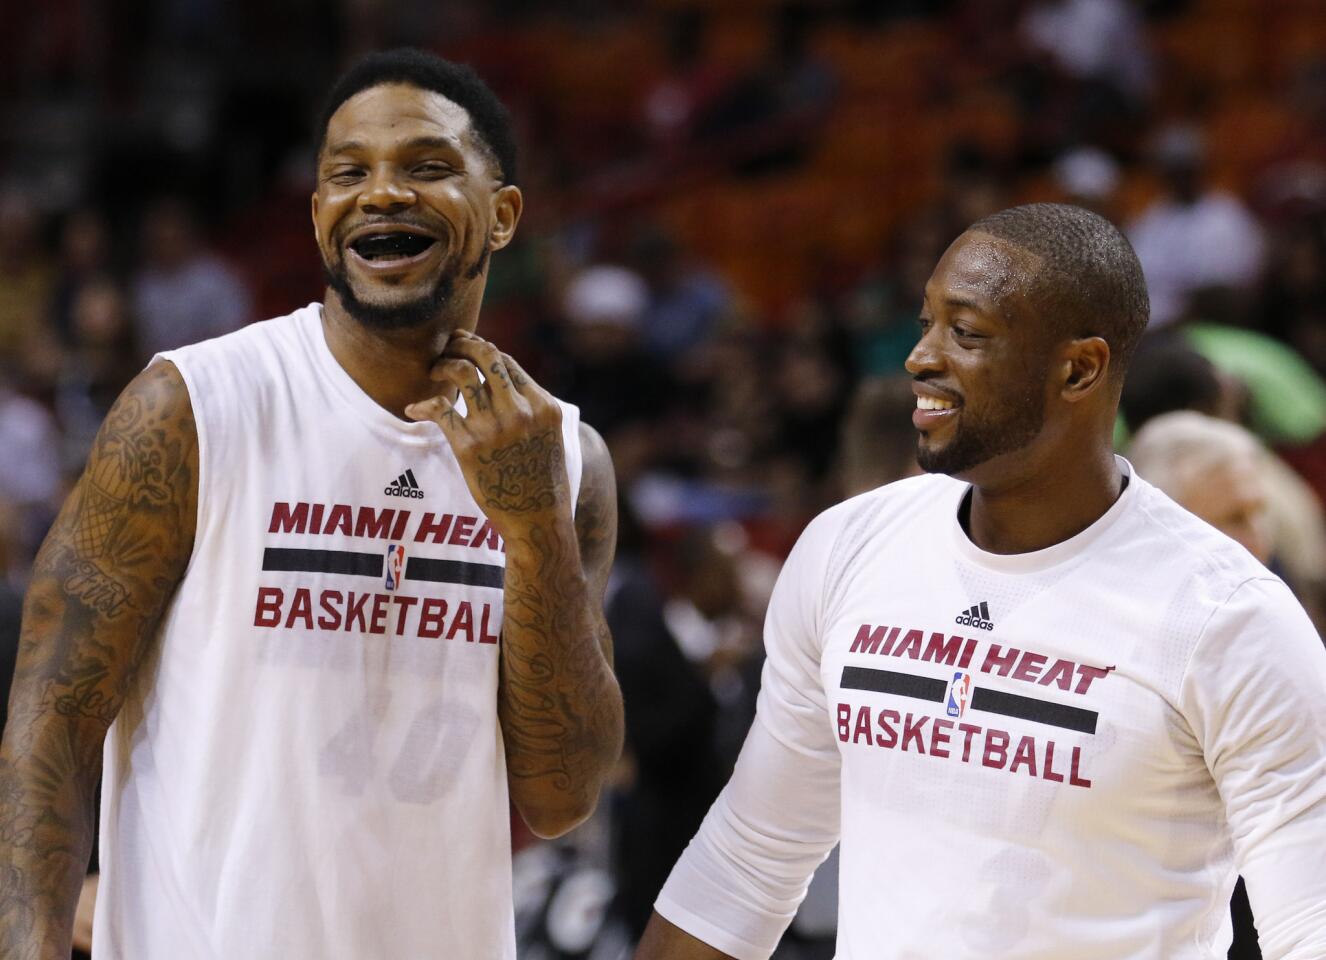 Miami Heat guard Dwyane Wade, right, and forward Udonis Haslem share a laugh during warmups before the Heat met the Brooklyn Nets in an NBA basketball game, Monday, March 28, 2016, in Miami. (AP Photo/Joe Skipper)